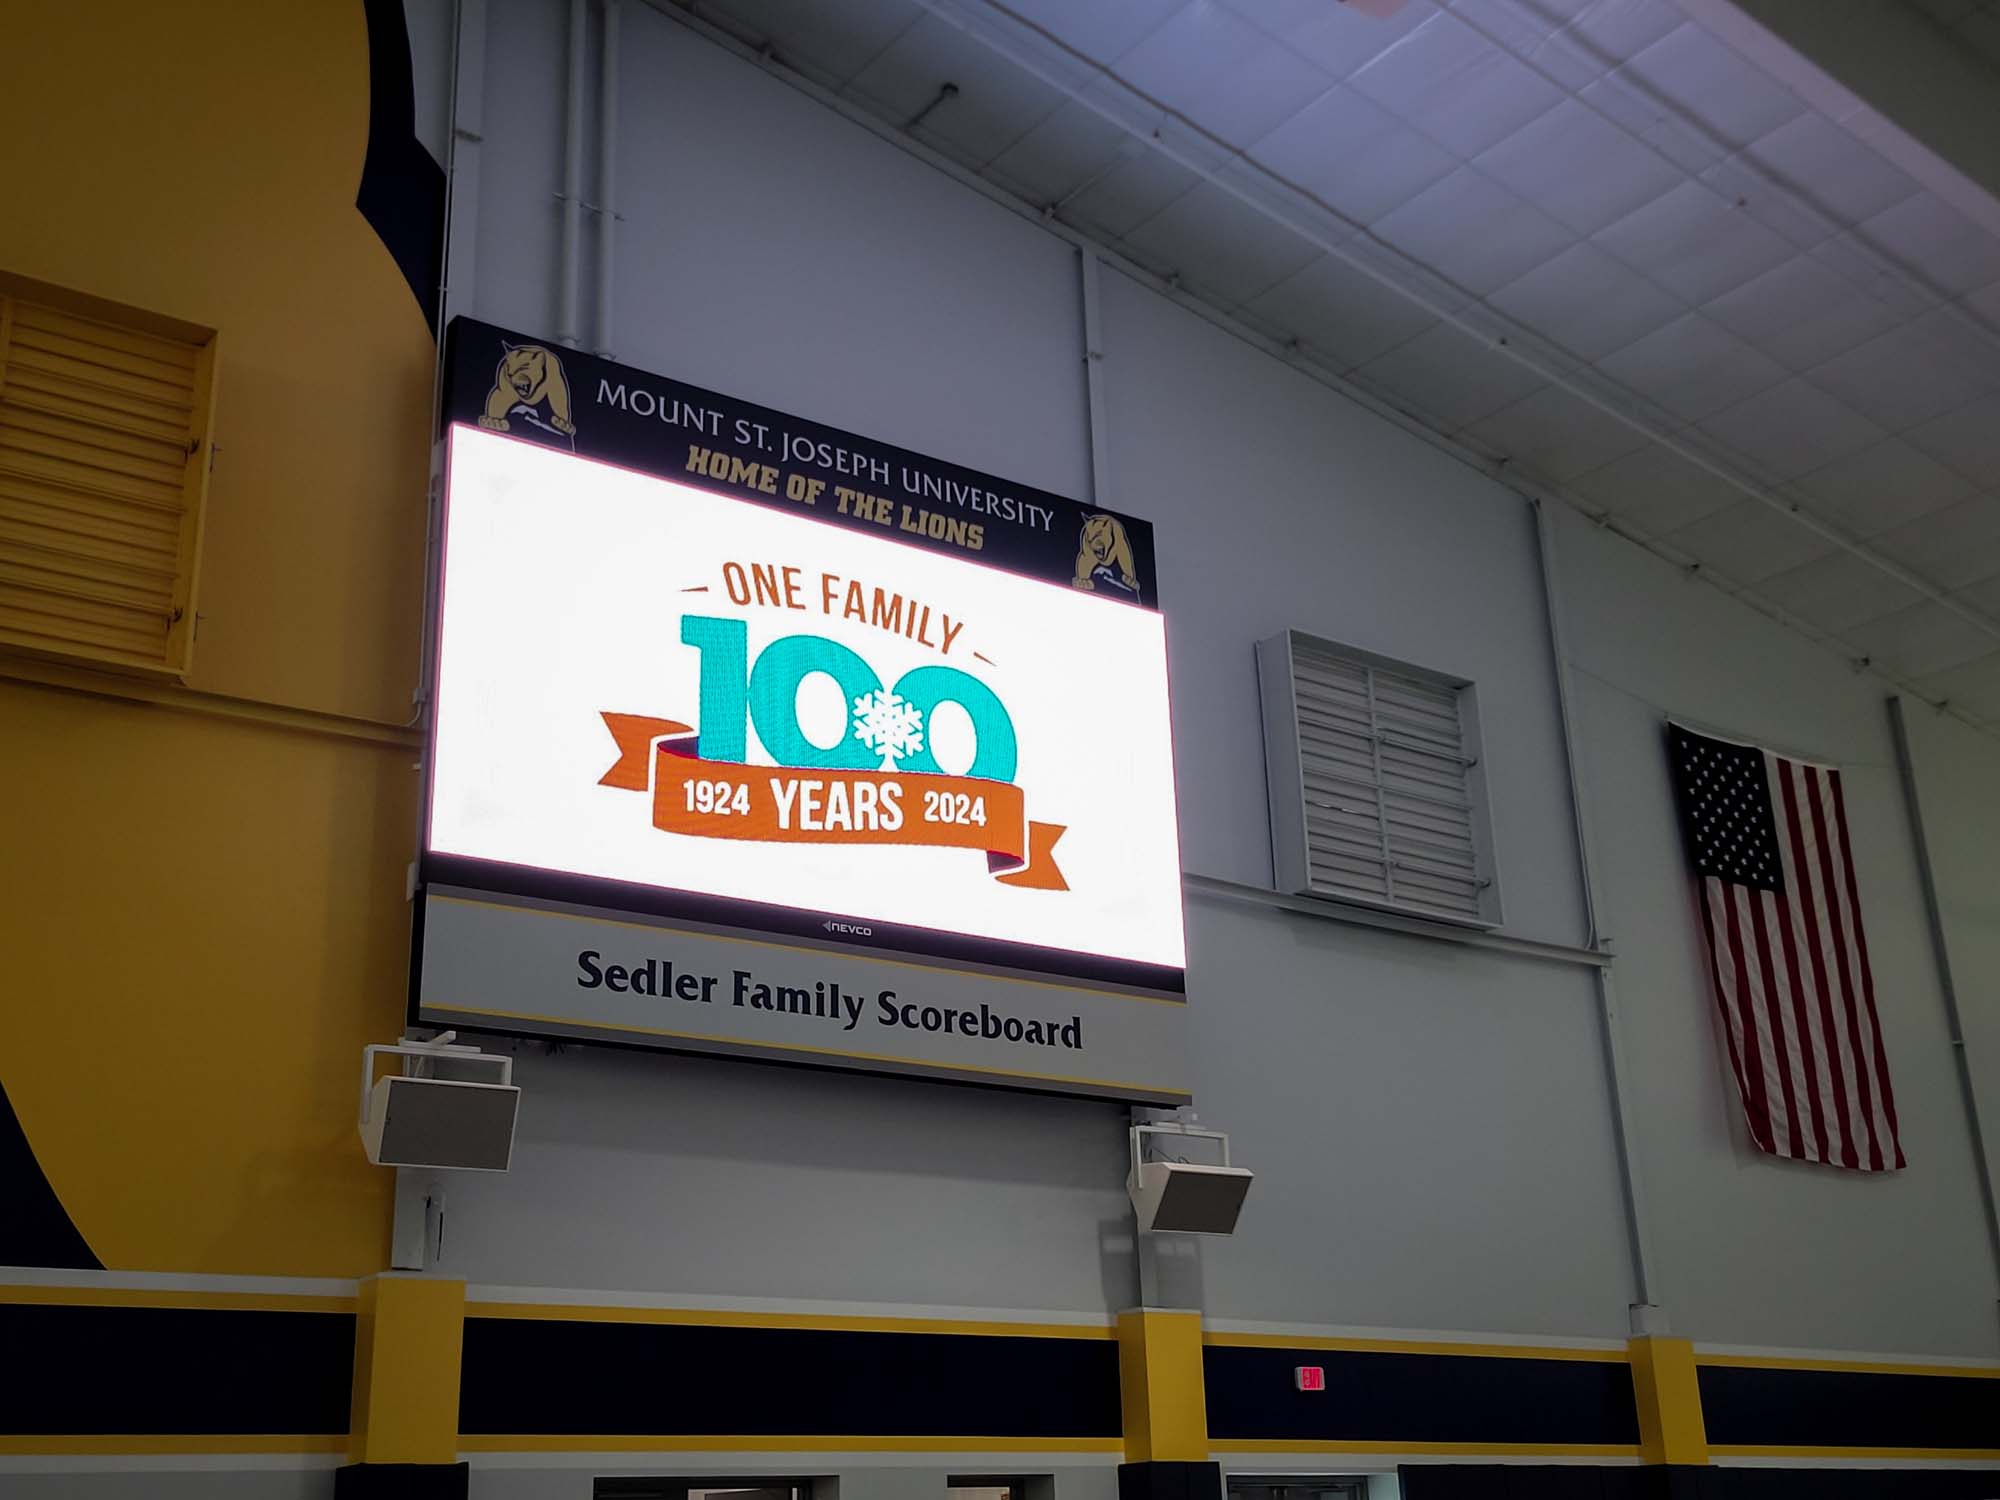 Image of the scoreboard for the Home City Ice Day event.